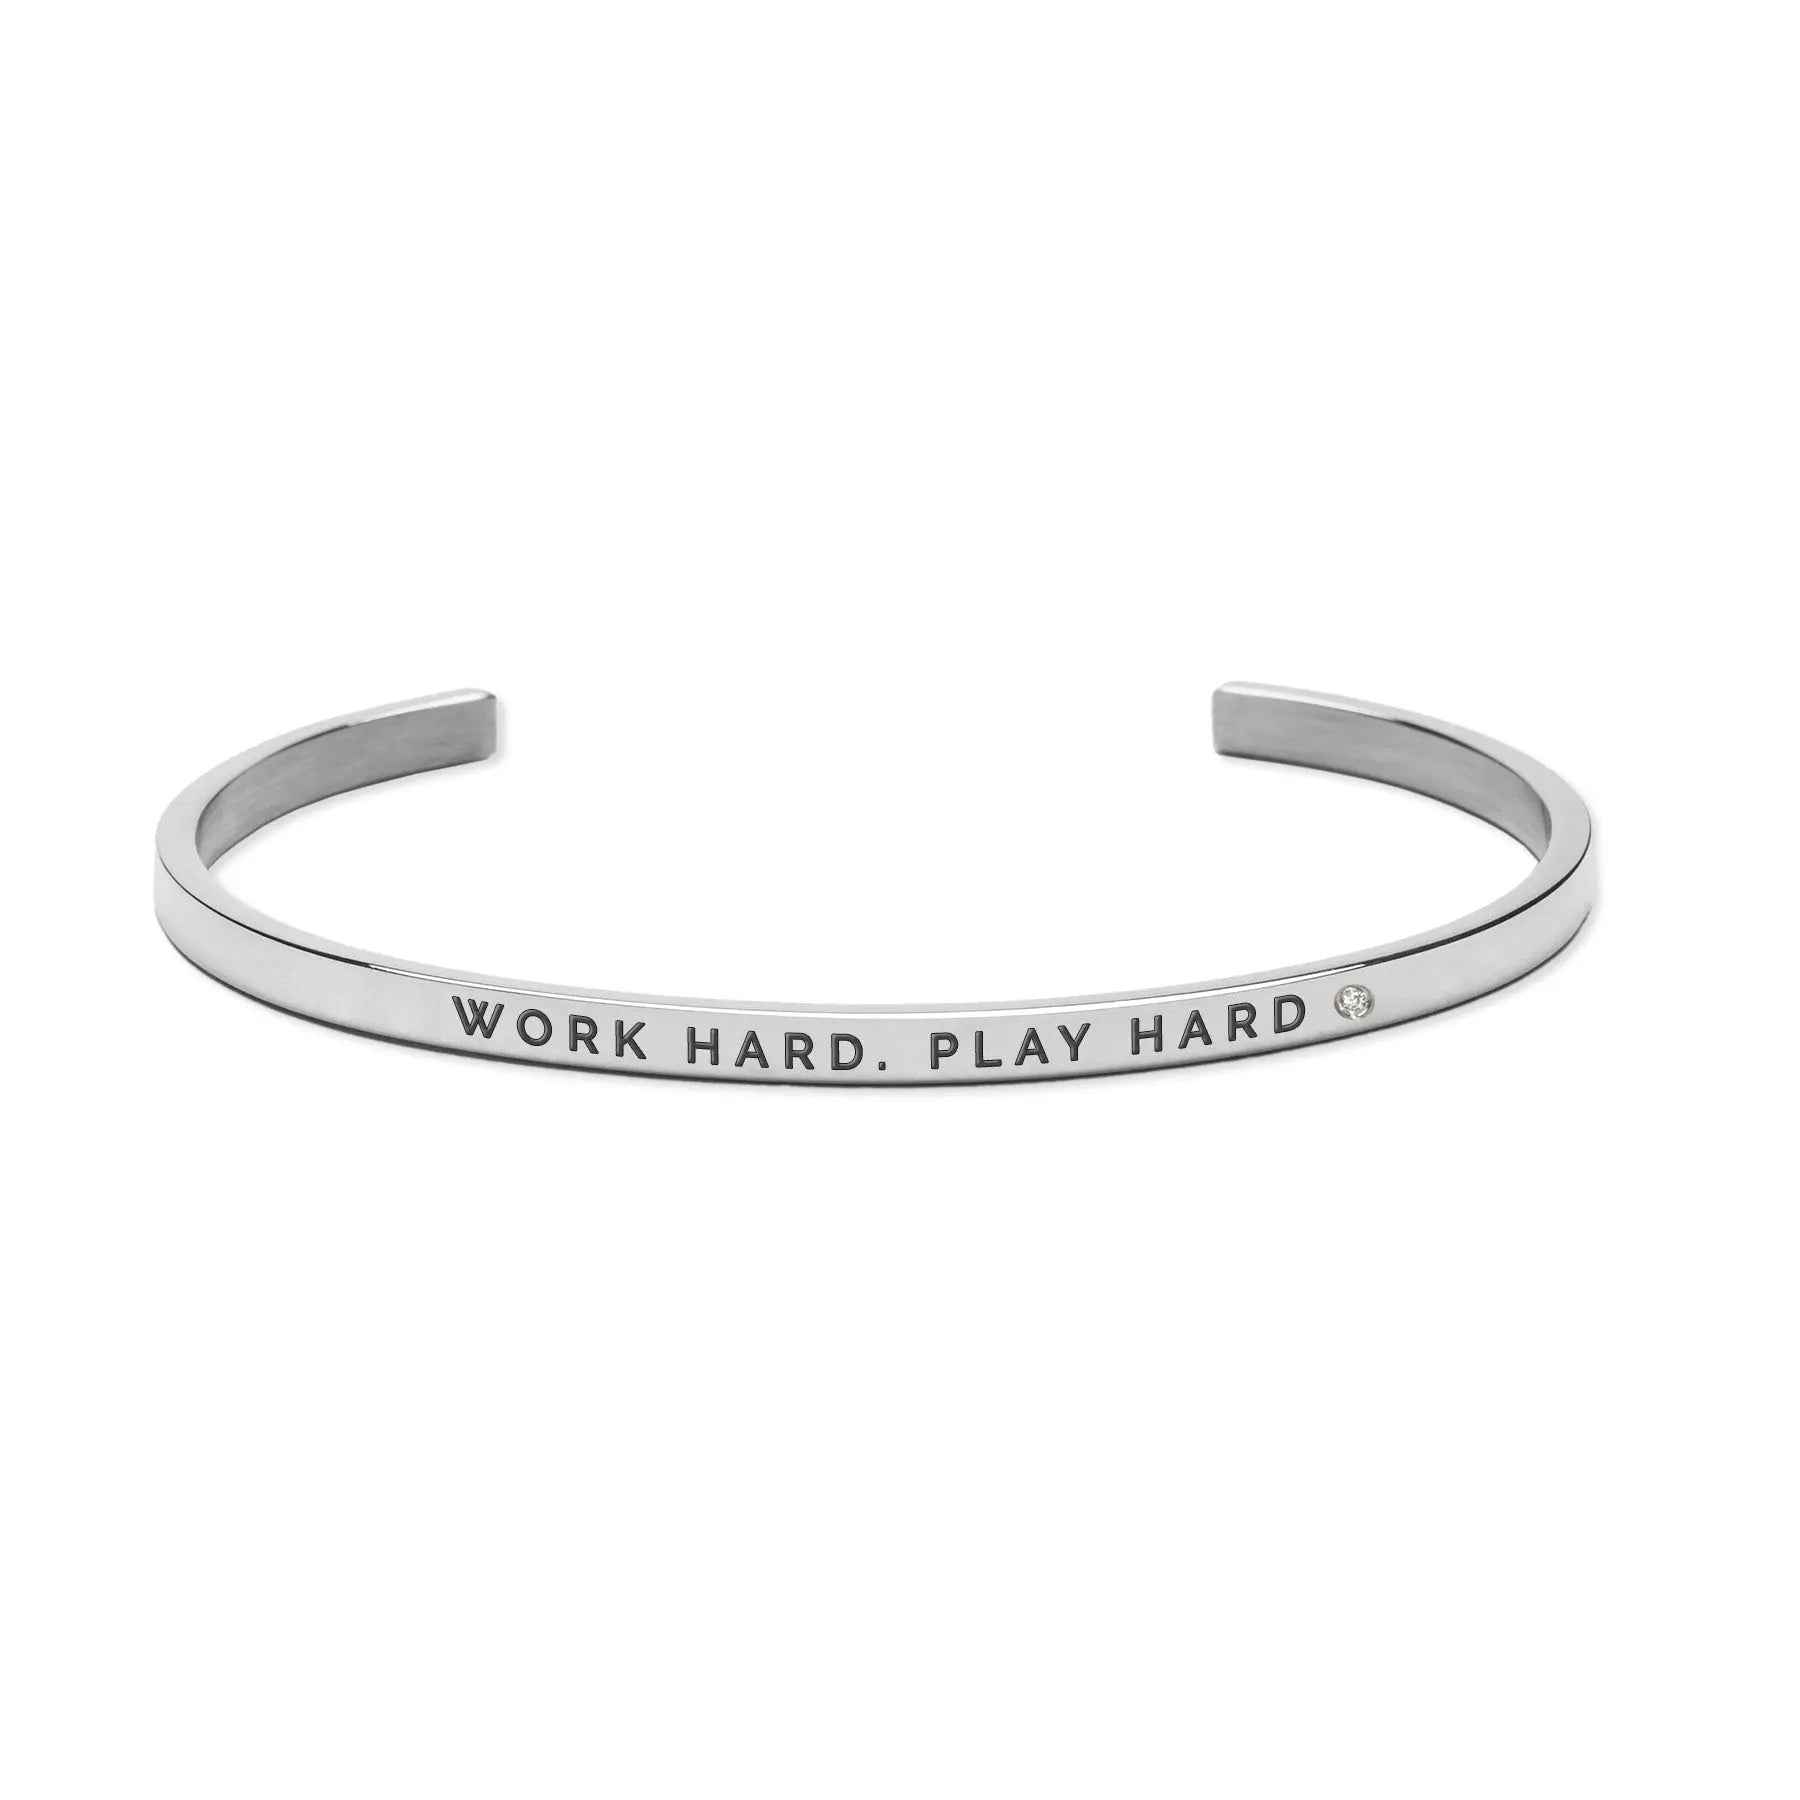 Silver bracelet with engraved words Work Hard. Play Hard. Adjustable, durable, and lightweight. Polished stainless steel. Encourages life balance and engagement. Width: 3mm. Available in silver, rose gold, gold.